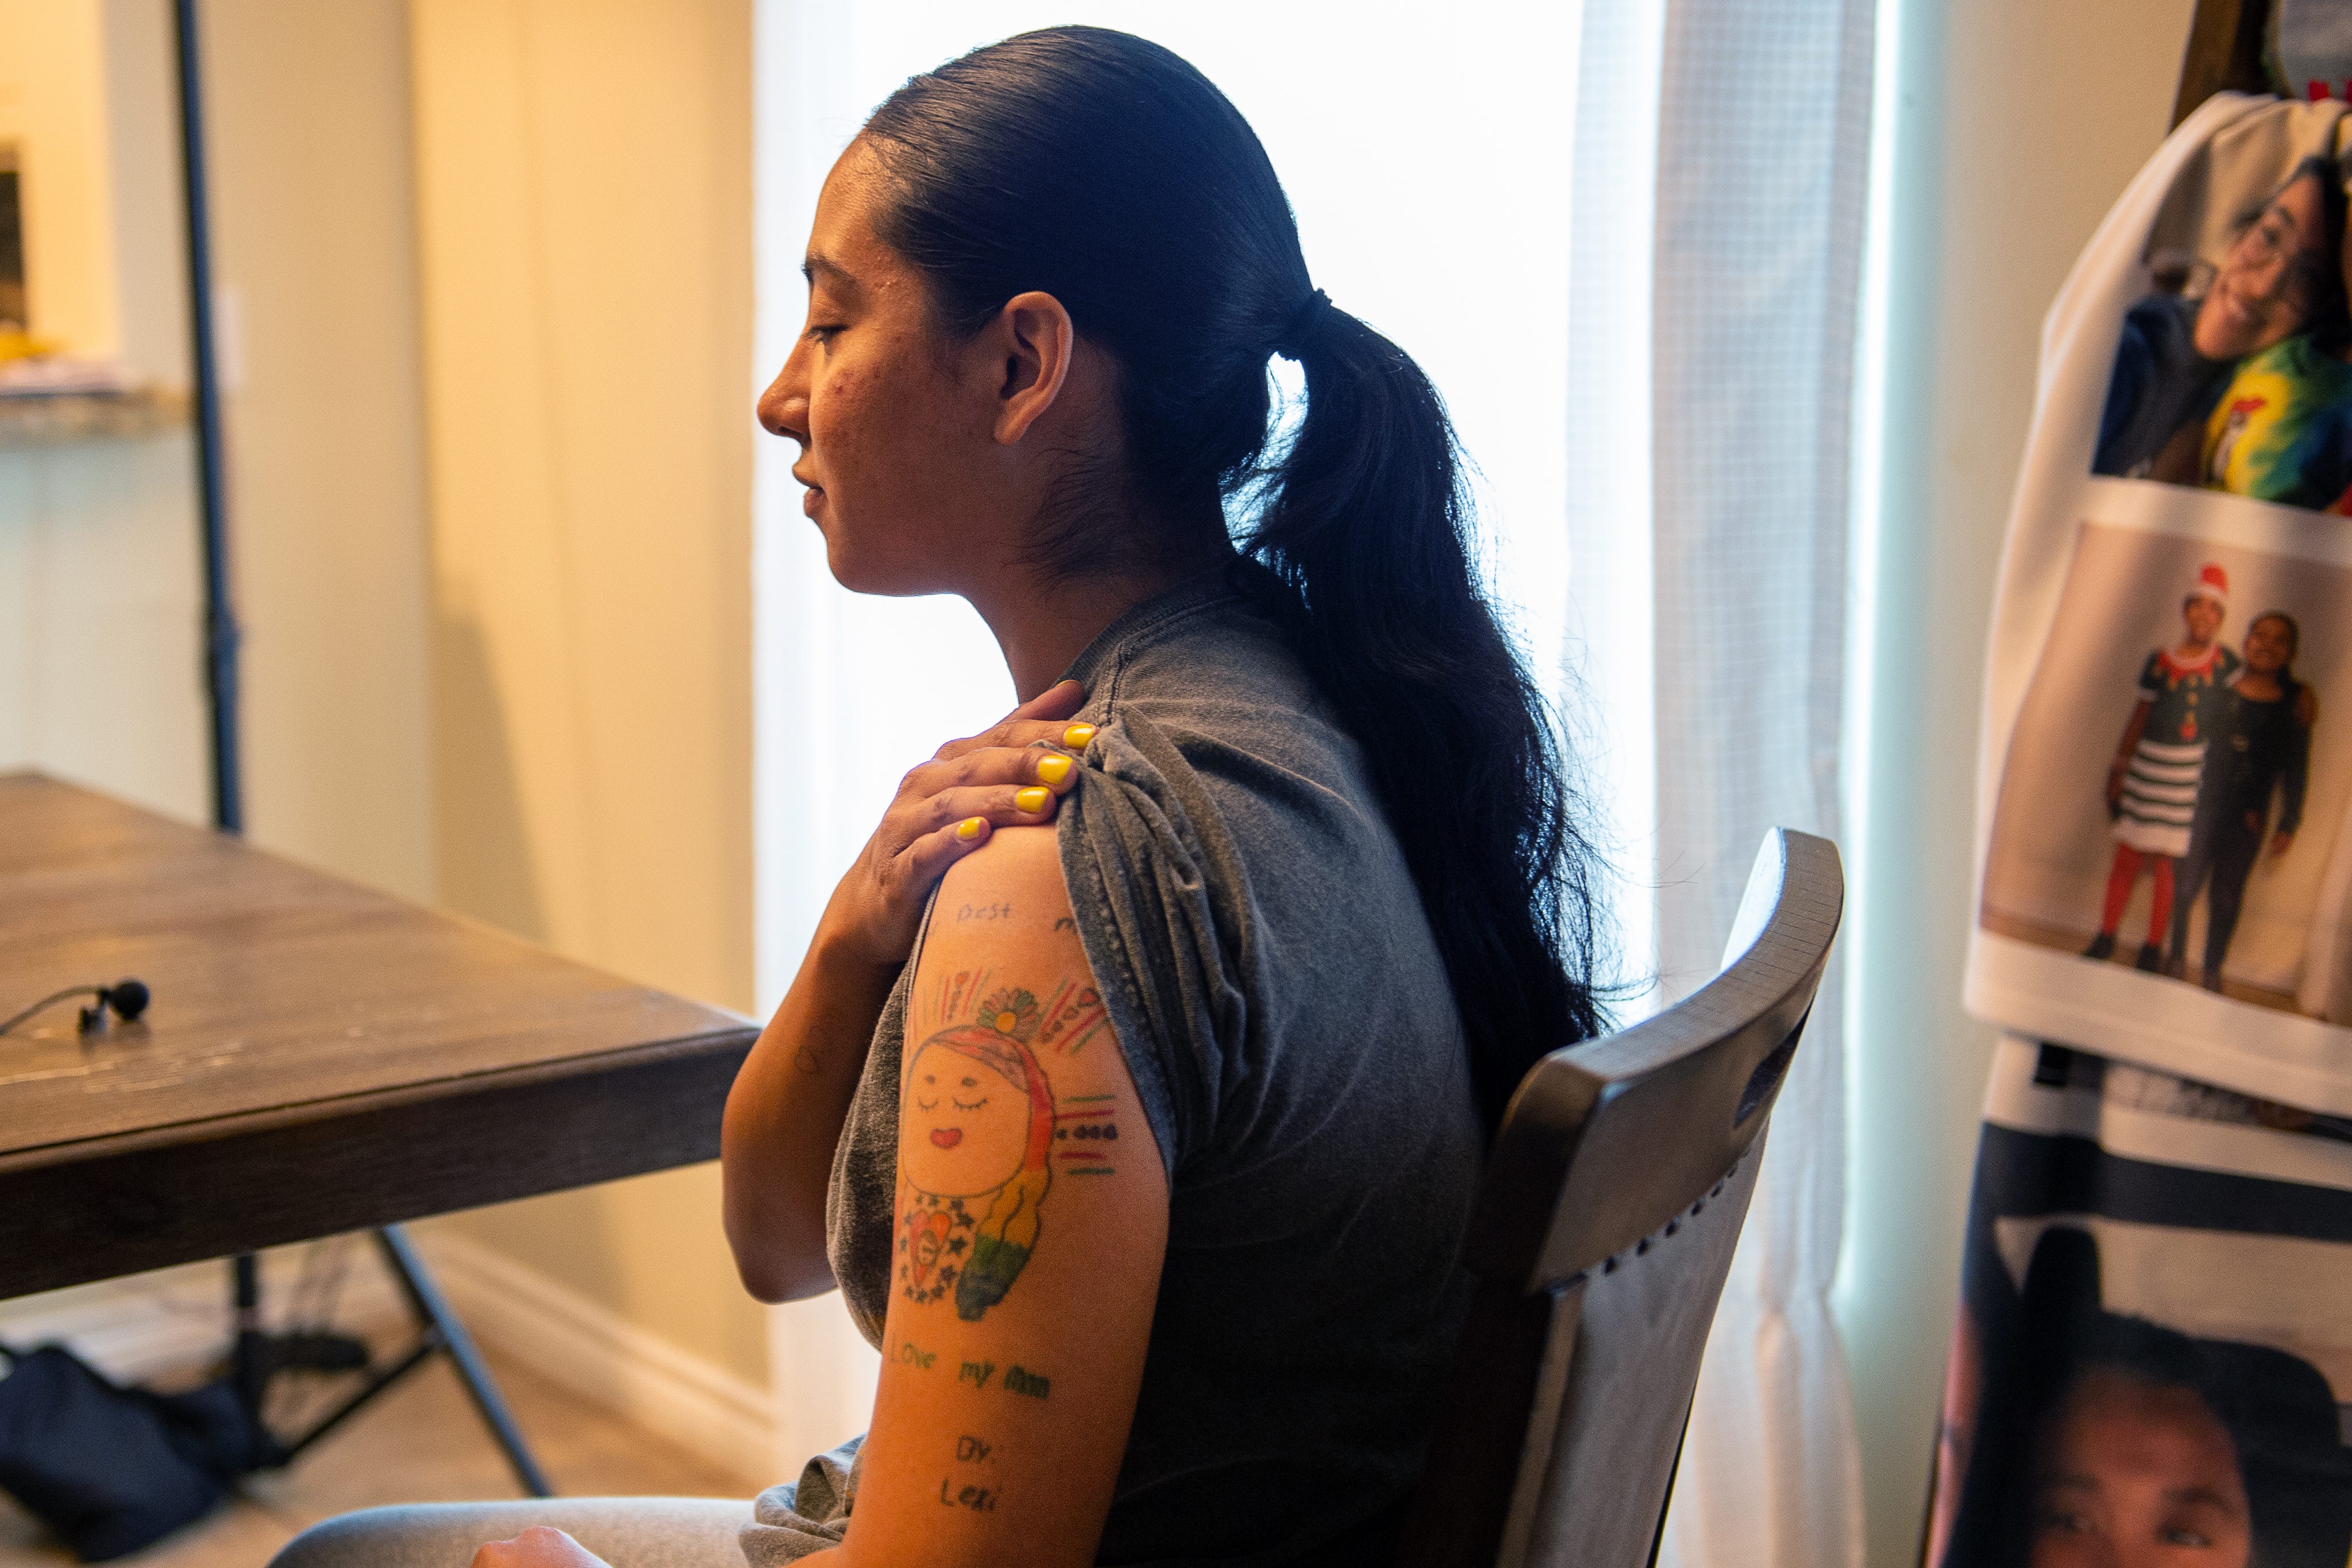 Kimberly Mata-Rubio shows a tattoo of a drawing made by her 10-year-old daughter Lexi Rubio. Lexi was one of the 19 students killed during the mass shooting at Robb Elementary School in Uvalde, Texas.